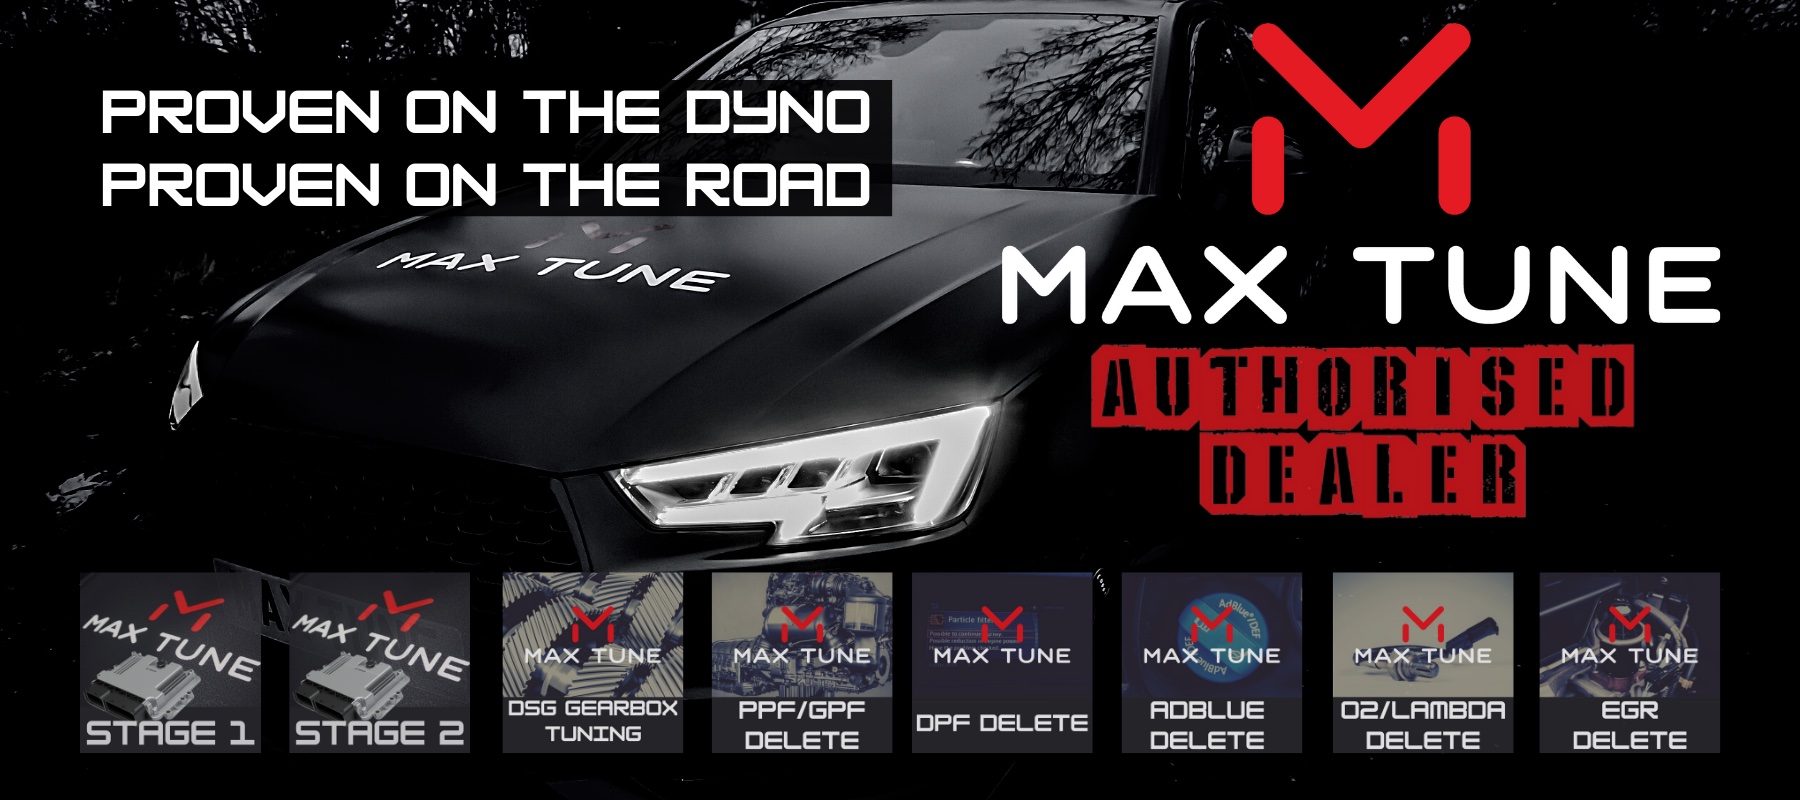 The image is a promotional advertisement for Coastal Motorsport a garage in North Walsham, Norfolk, which is an authorised dealer of Max Tune, offering specialised vehicle remapping services. The dark-toned image features the front of a sleek car with the text "PROVEN ON THE DYNO, PROVEN ON THE ROAD" prominently displayed. Below, a series of Max Tune service options are showcased, including STAGE 1, STAGE 2, DSG GEARBOX TUNING, PPF/GPF DELETE, DPF DELETE, ADBLUE DELETE, O2/LAMBDA DELETE, and EGR DELETE. These services indicate a comprehensive range of tuning and performance enhancements available at the garage.